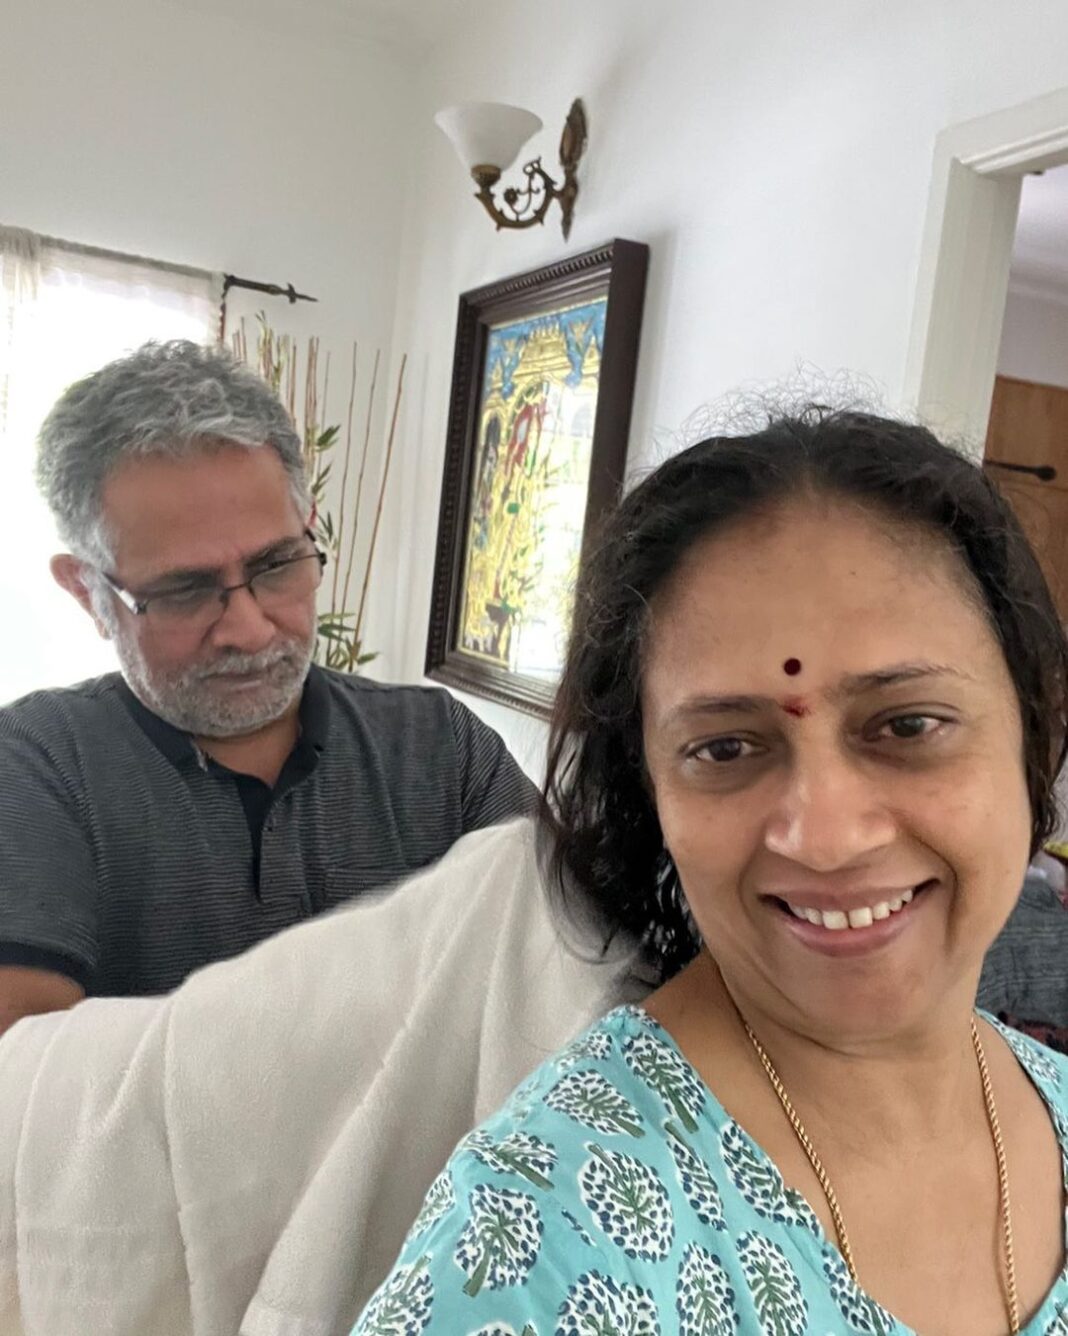 Lakshmy Ramakrishnan Instagram - Guess many do this for their partners and children❤️ share some cute pics guys, let us celebrate these #RealMen in our lives , who don’t have any insecurities whatsoever @DrRamakrishnan8 inspite of the health crisis at home, we manage to steal some romantic moments🥰